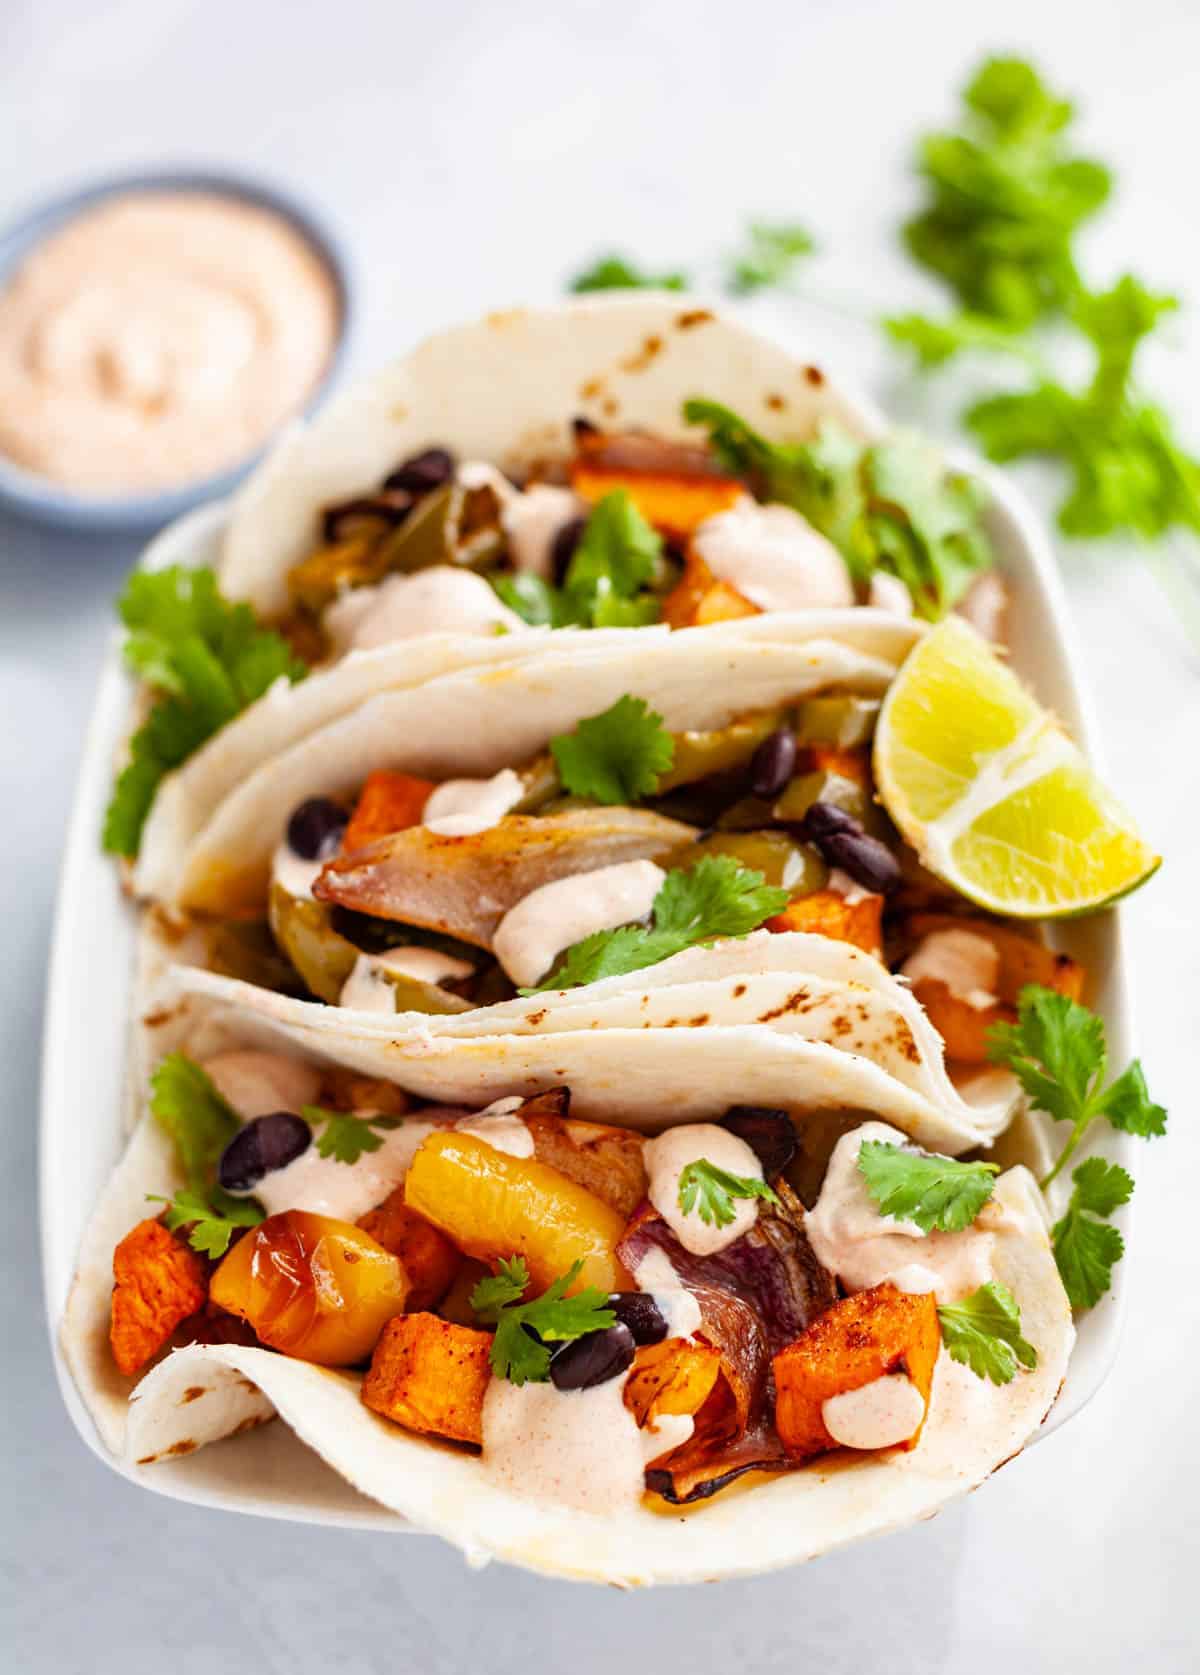 Three flour tortillas filled with vegetarian sweet potato fajitas and drizzled with smoky lime sour cream